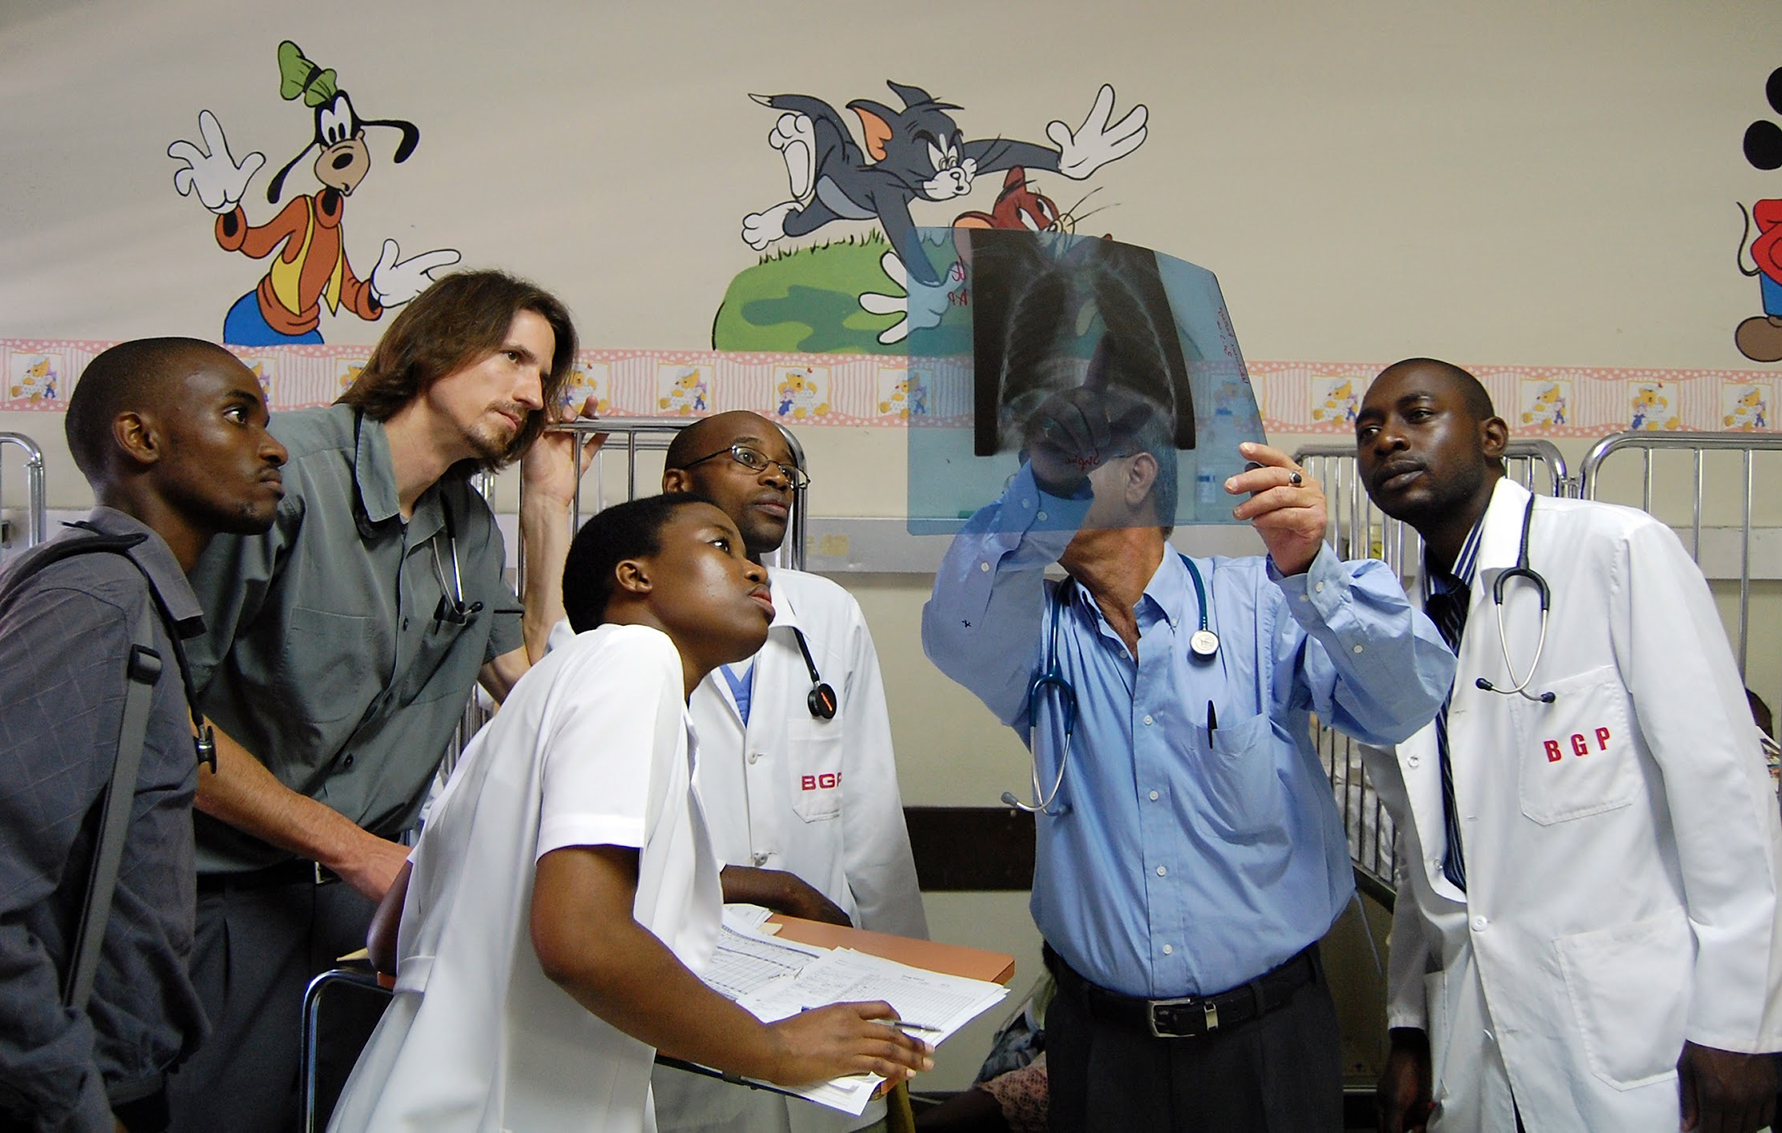 A group of doctors looking at an x-ray in a children’s hospital in Botswana.